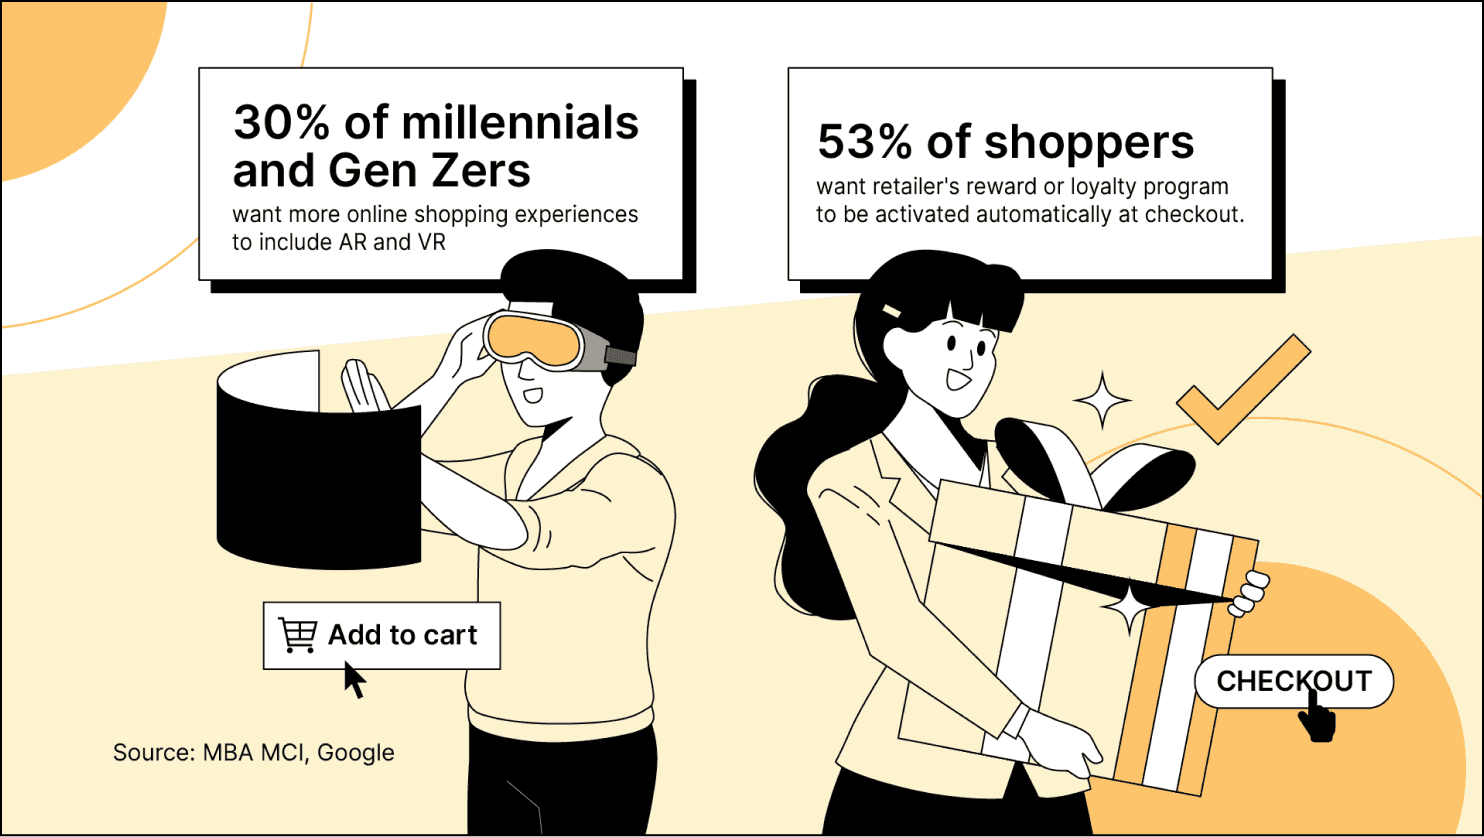 Stats on different consumer demands for personalized shopping experiences.